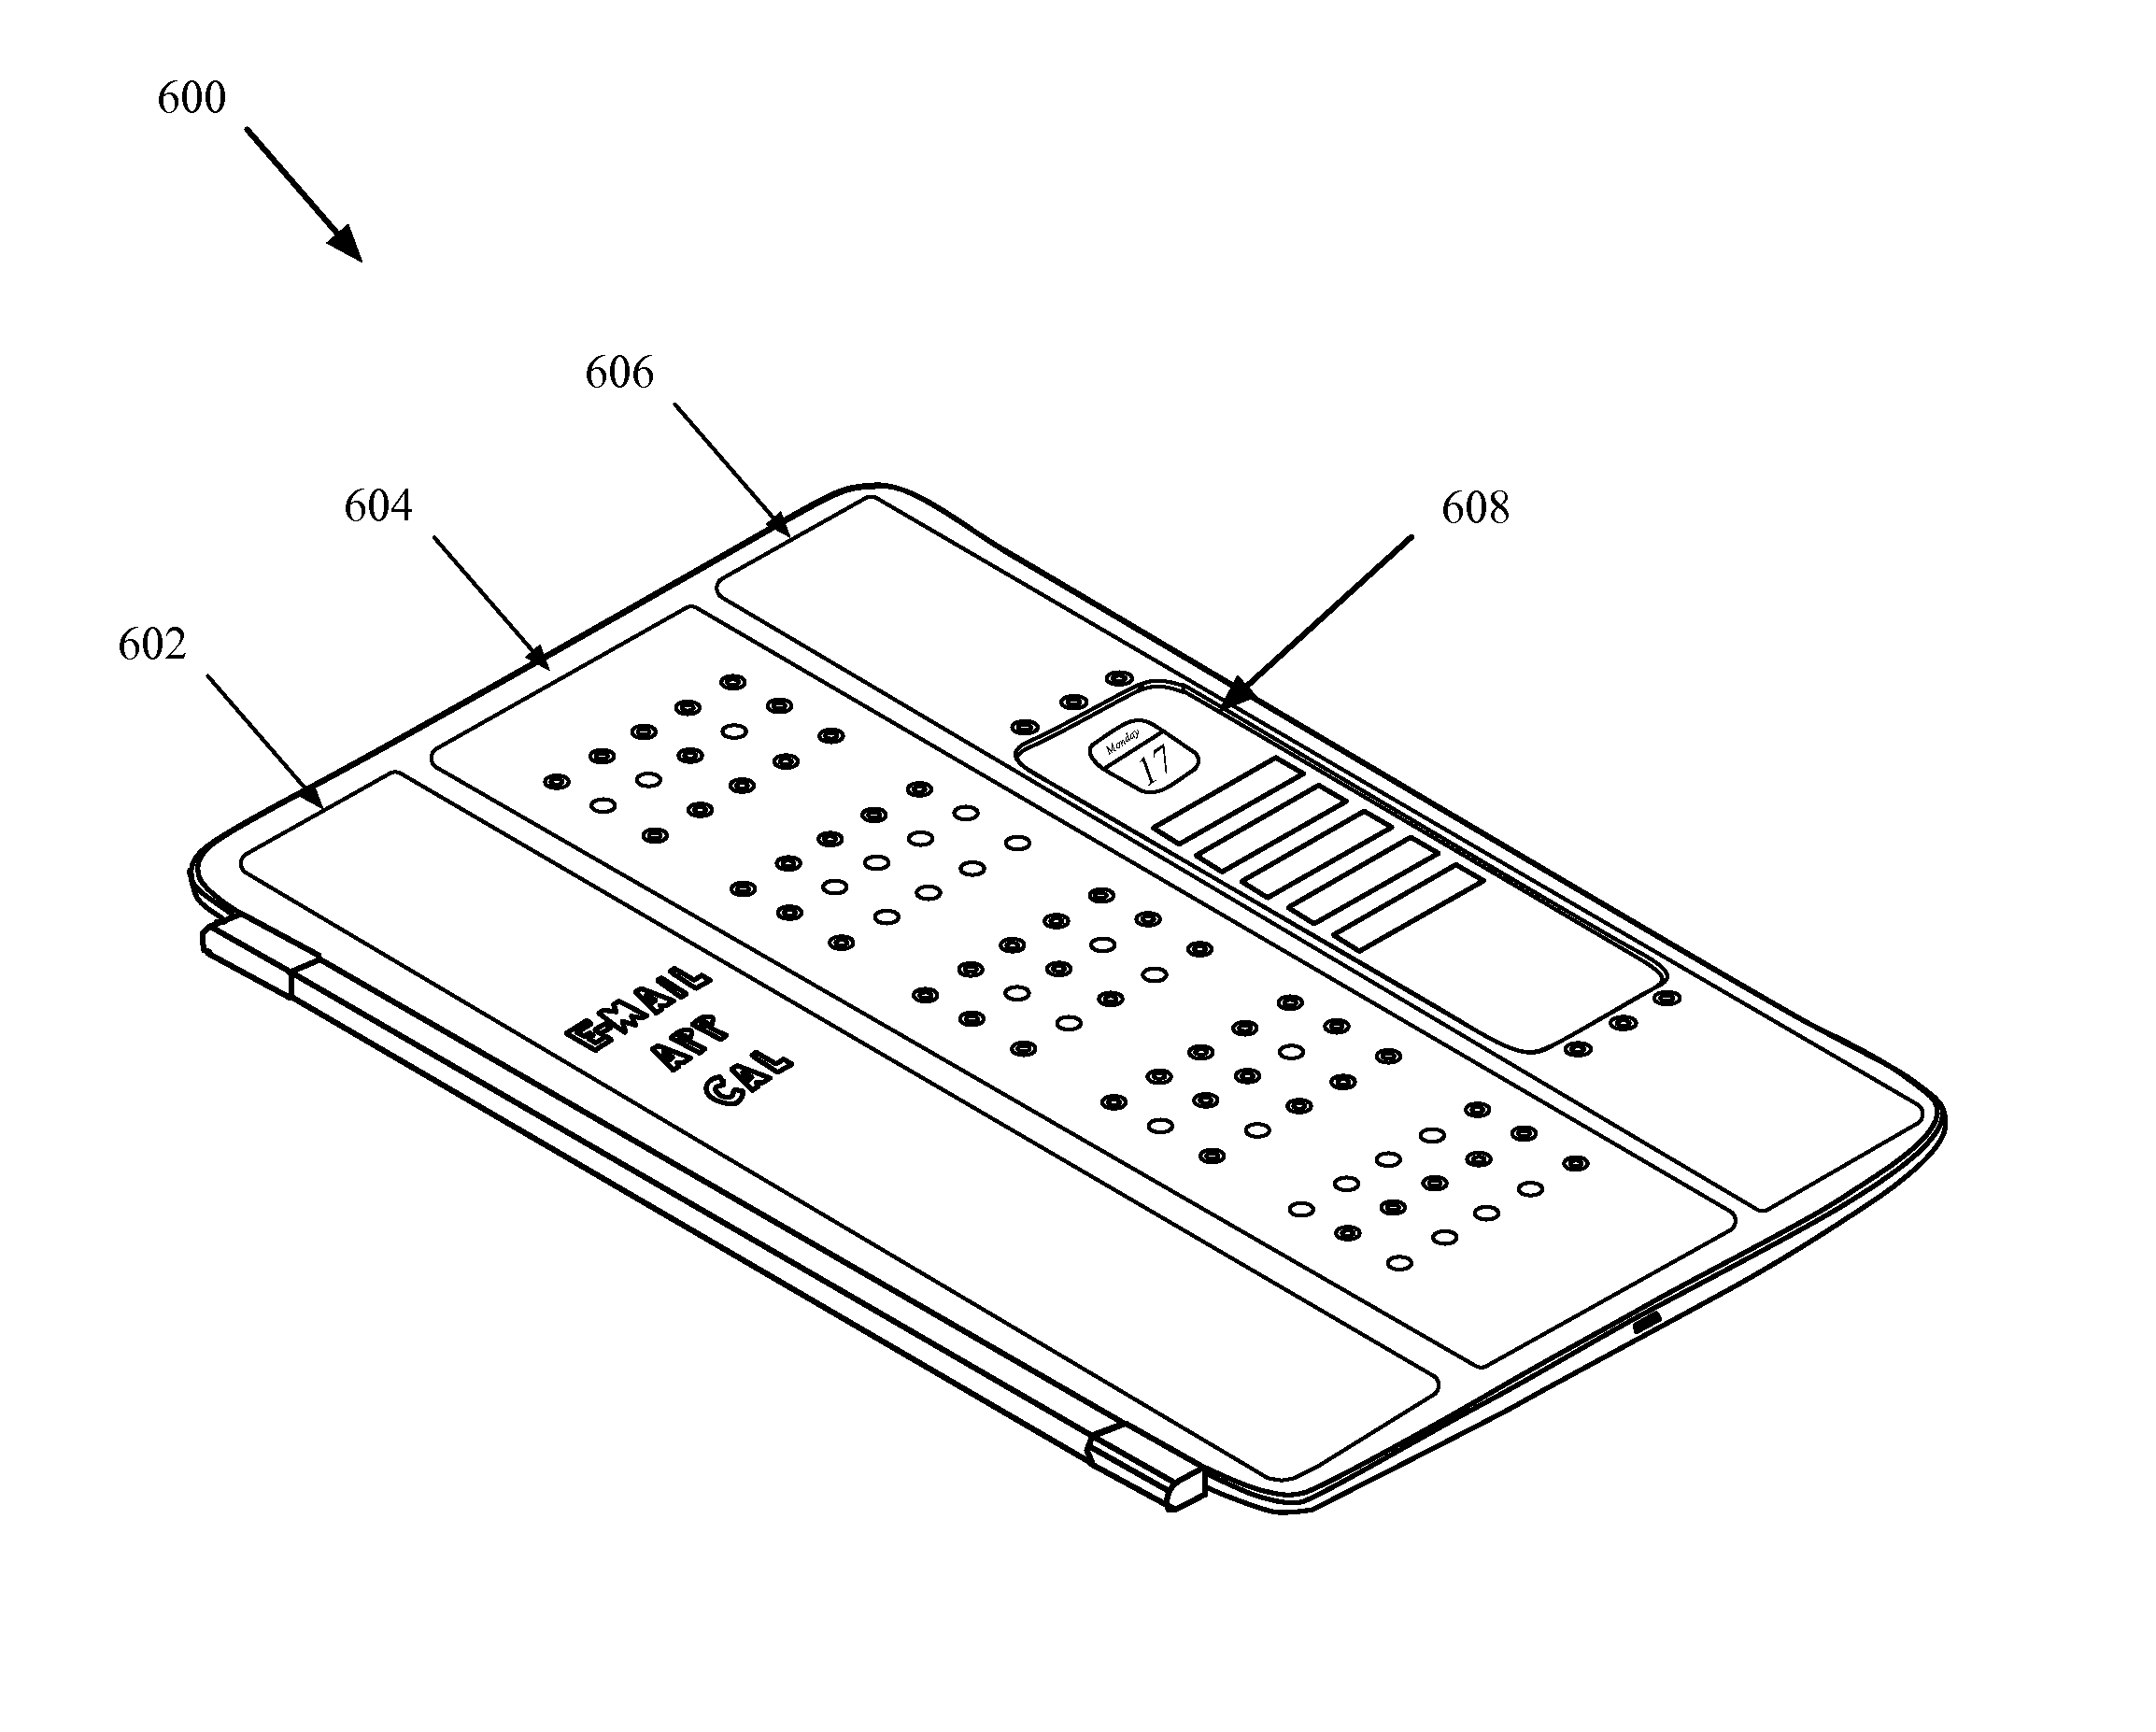 Integrated visual notification system in an accessory device